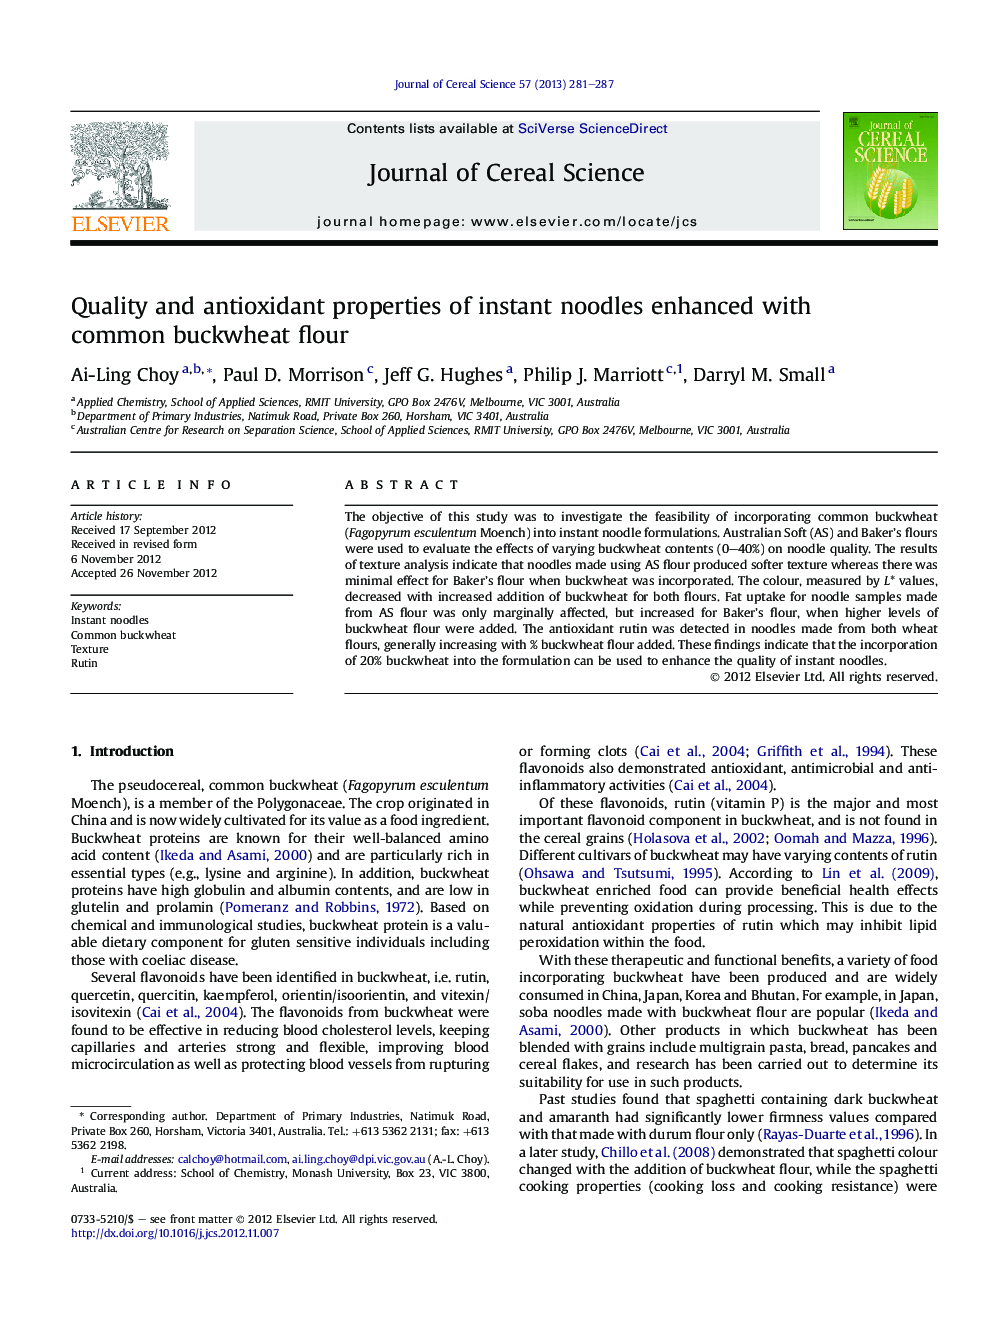 Quality and antioxidant properties of instant noodles enhanced with common buckwheat flour